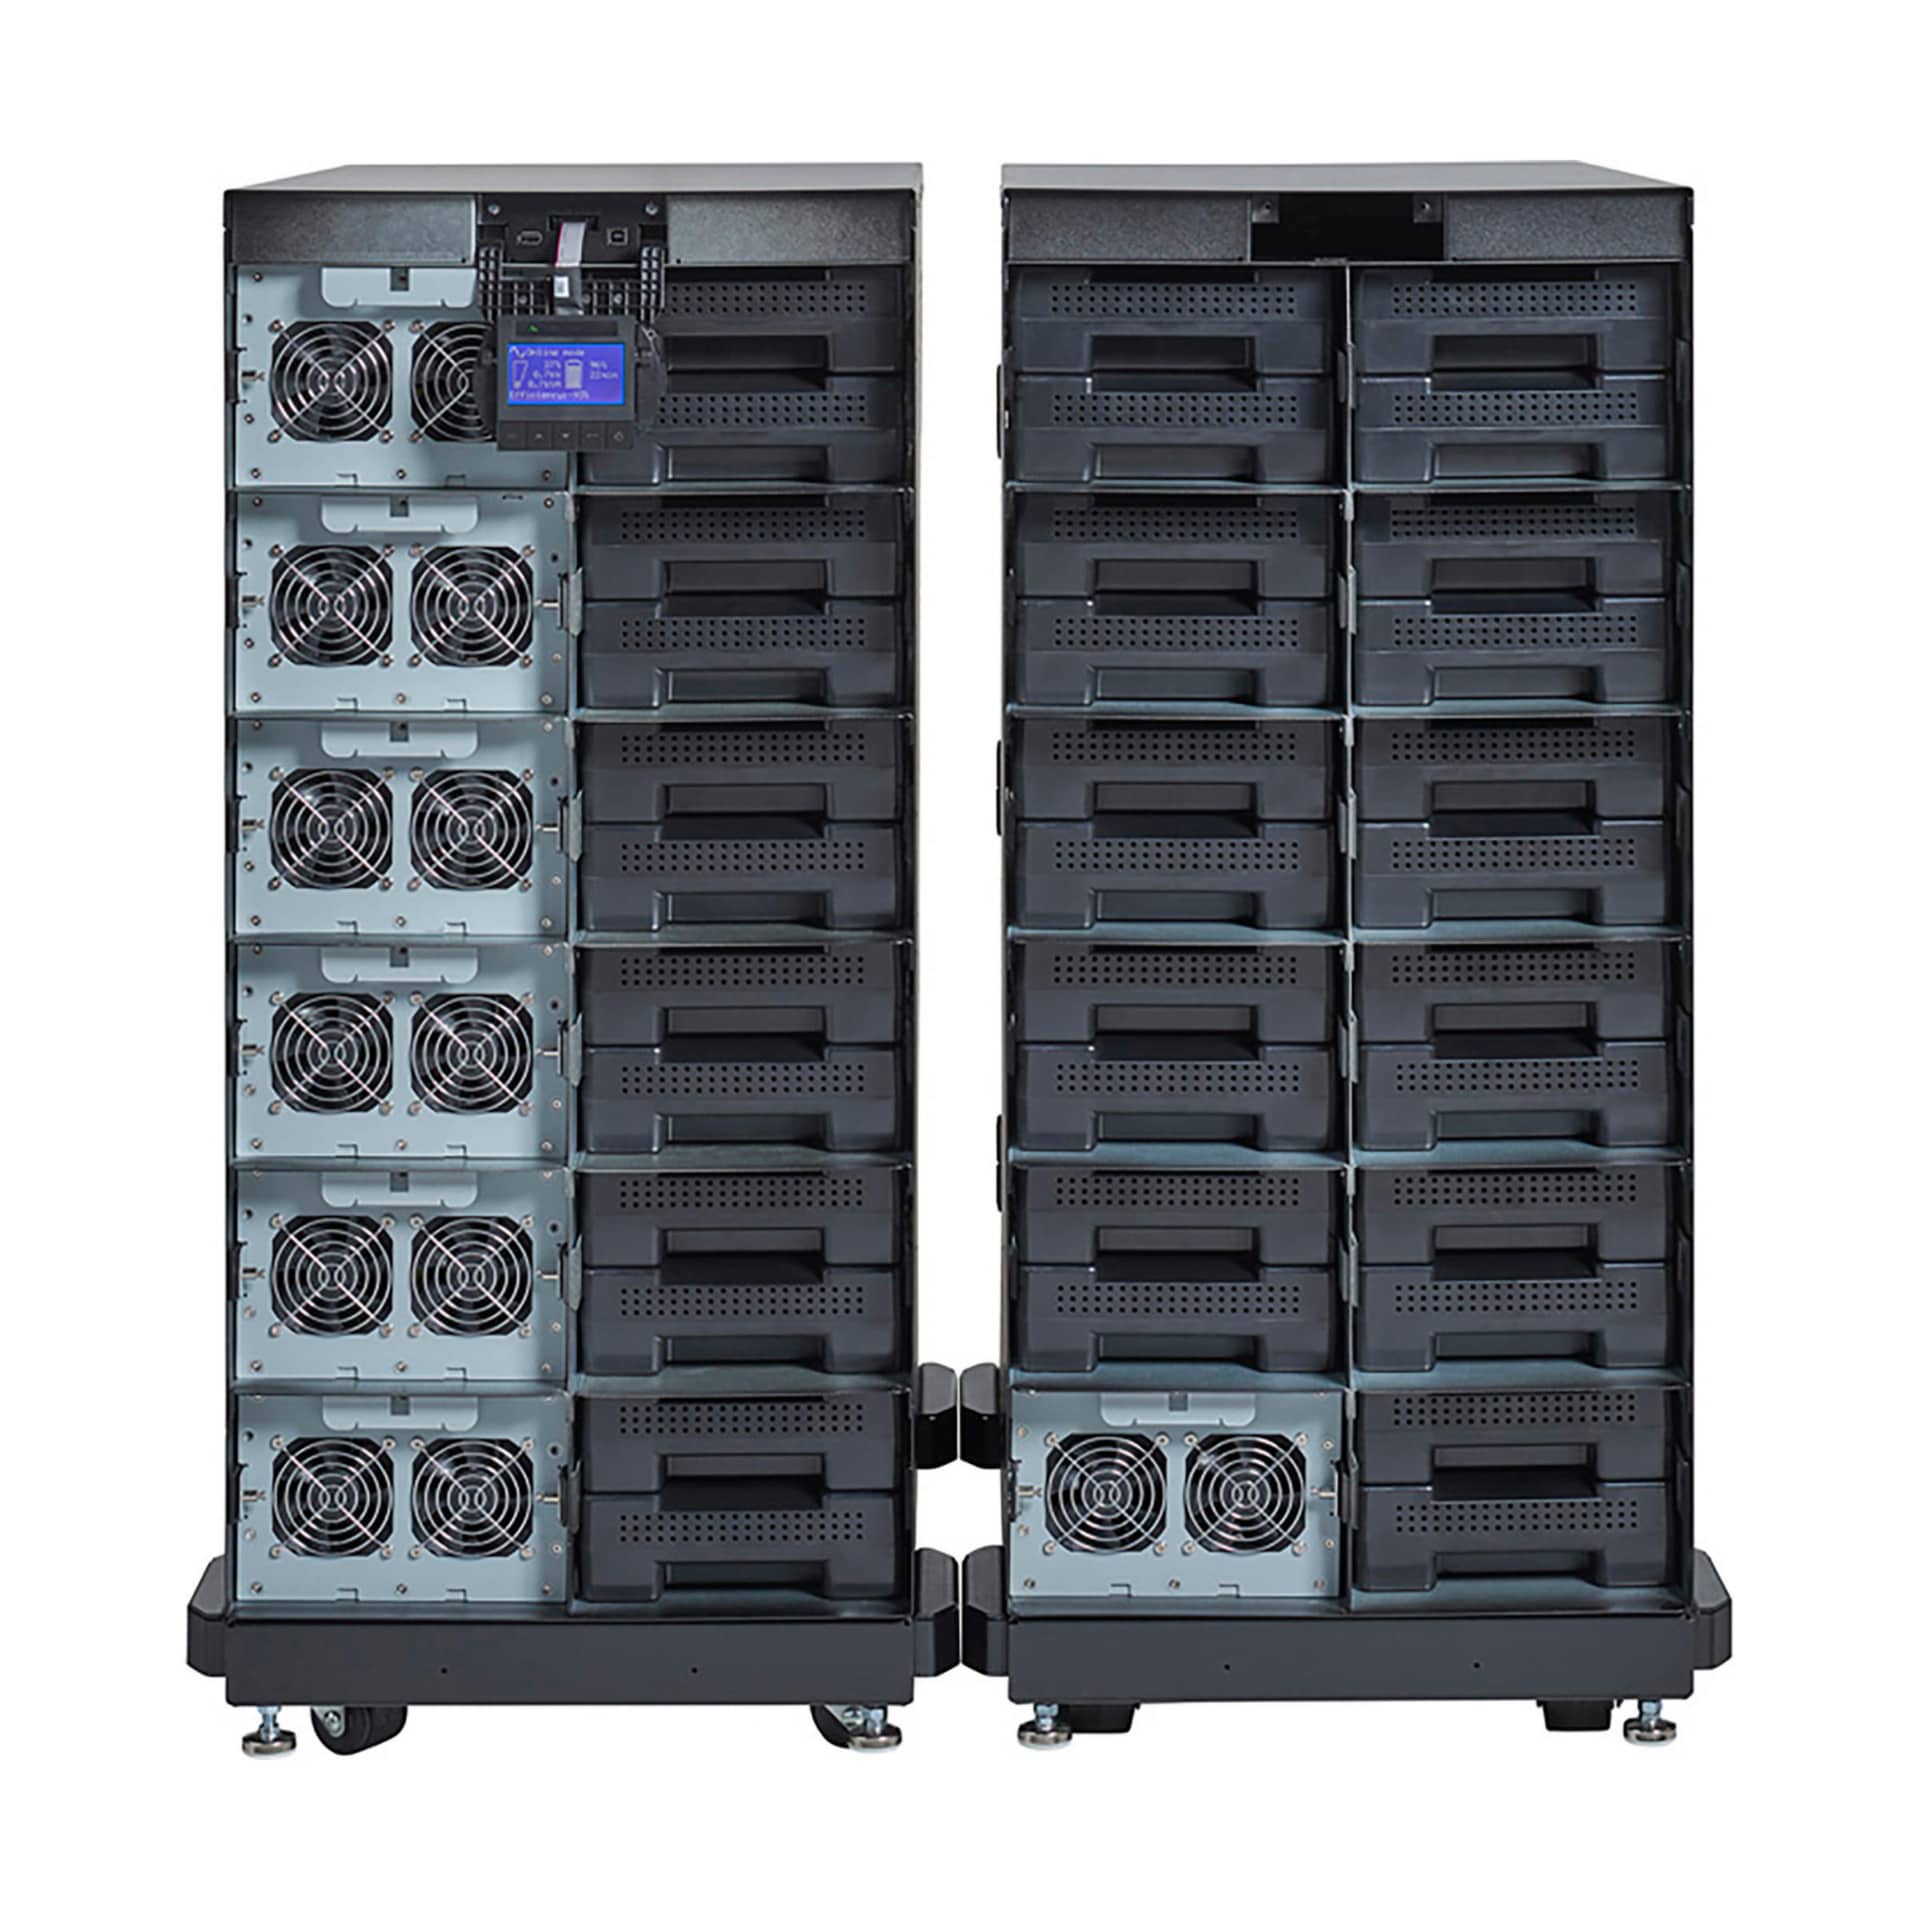 Eaton 9PXM 8-Slot Connected External Battery Cabinet for 9PXM Online Double-Conversion UPS, Add up to 4 EBMs, 14U